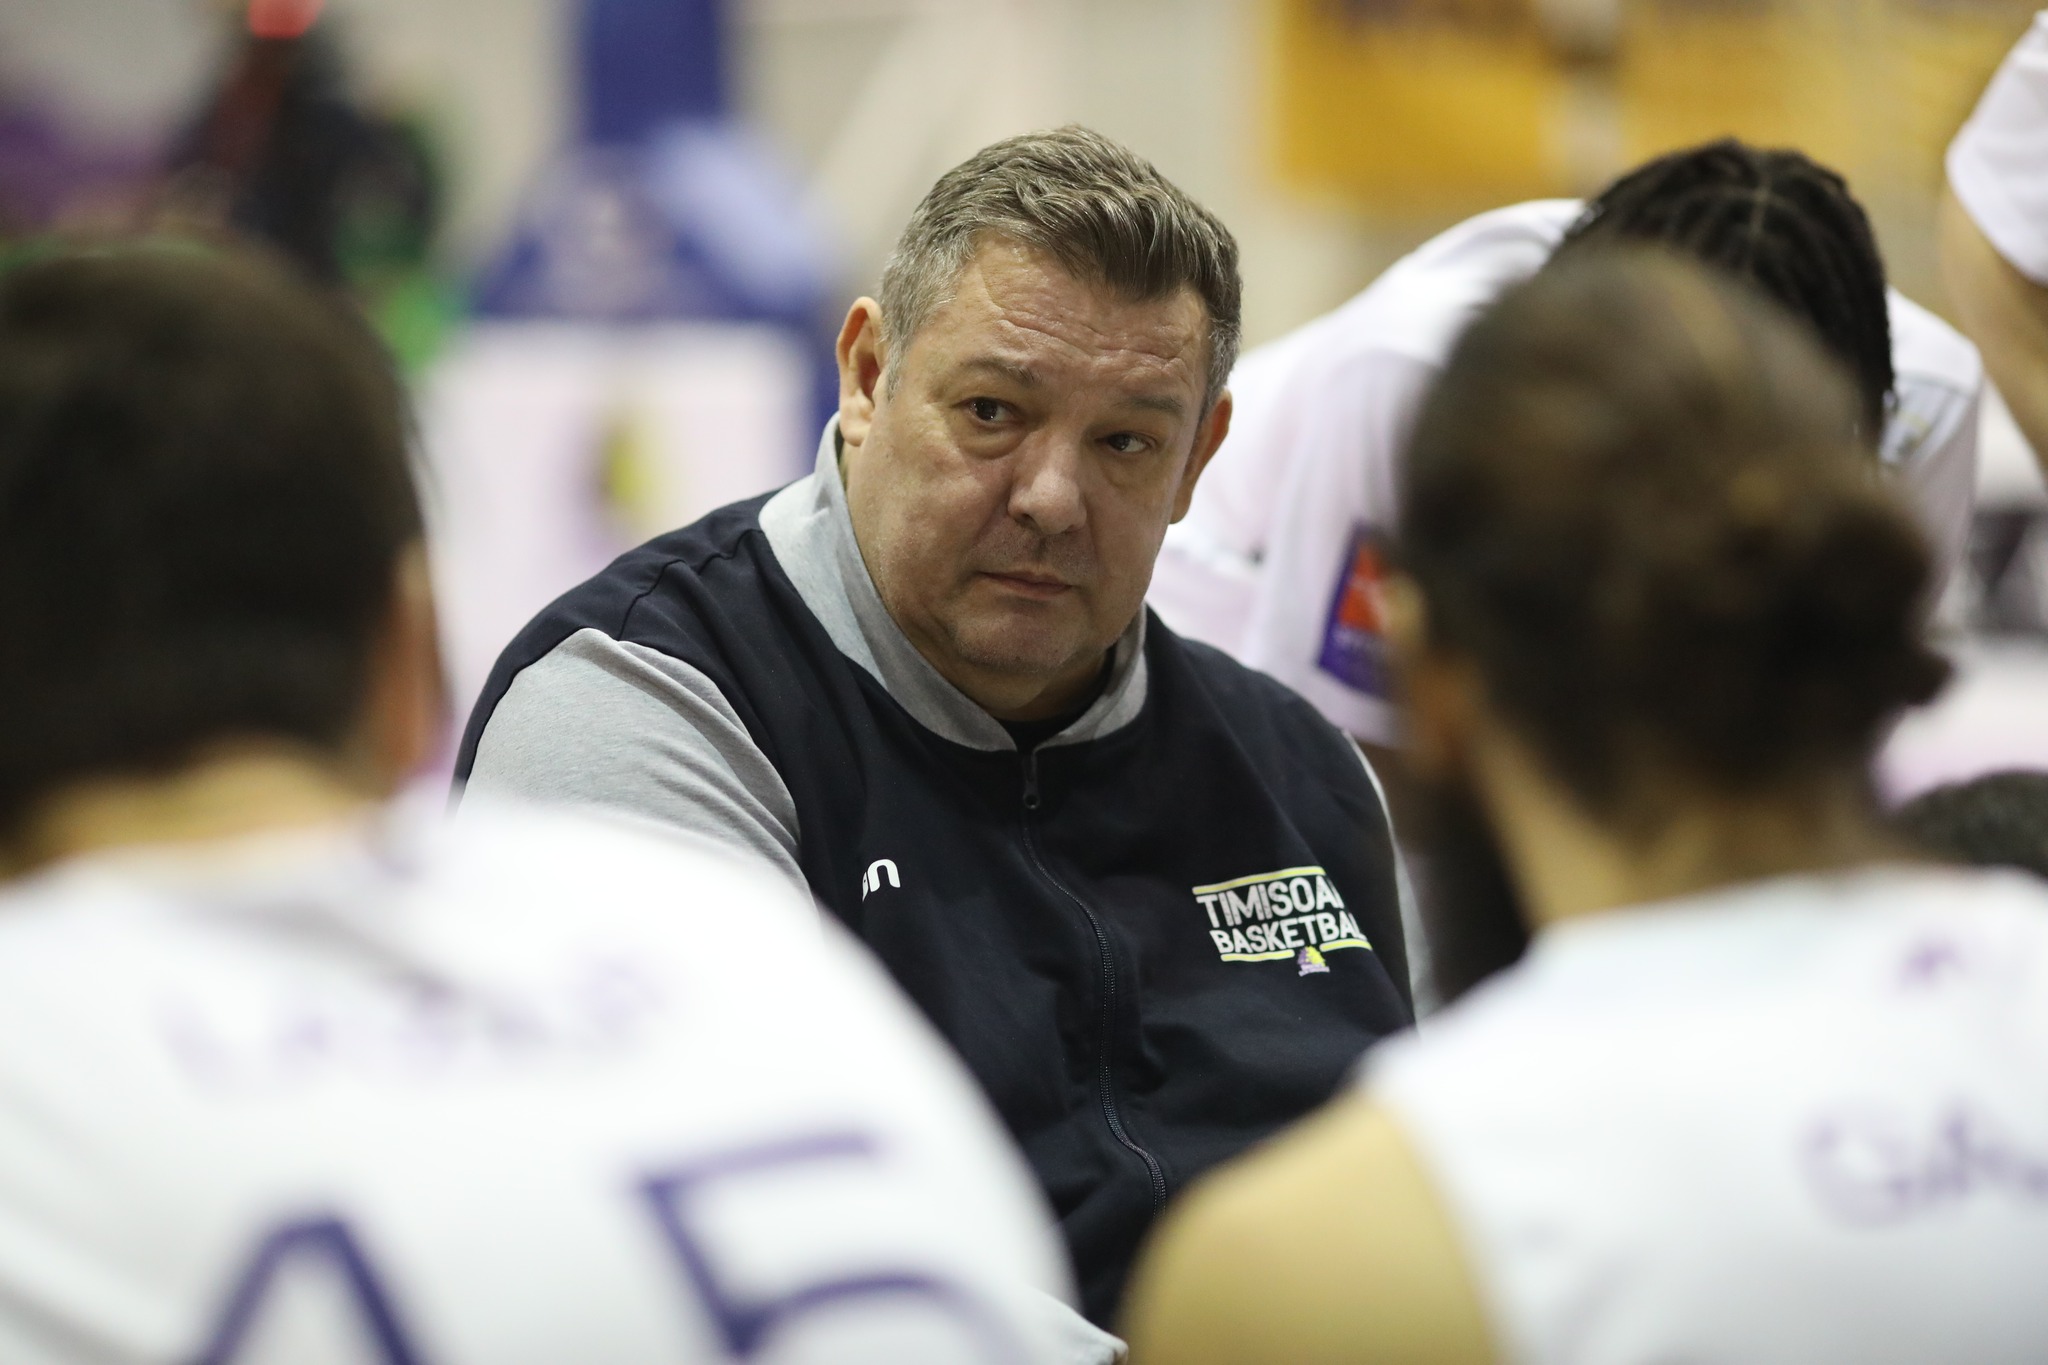 Presenting the Final Four participants, Timisoara goes to play good basketball